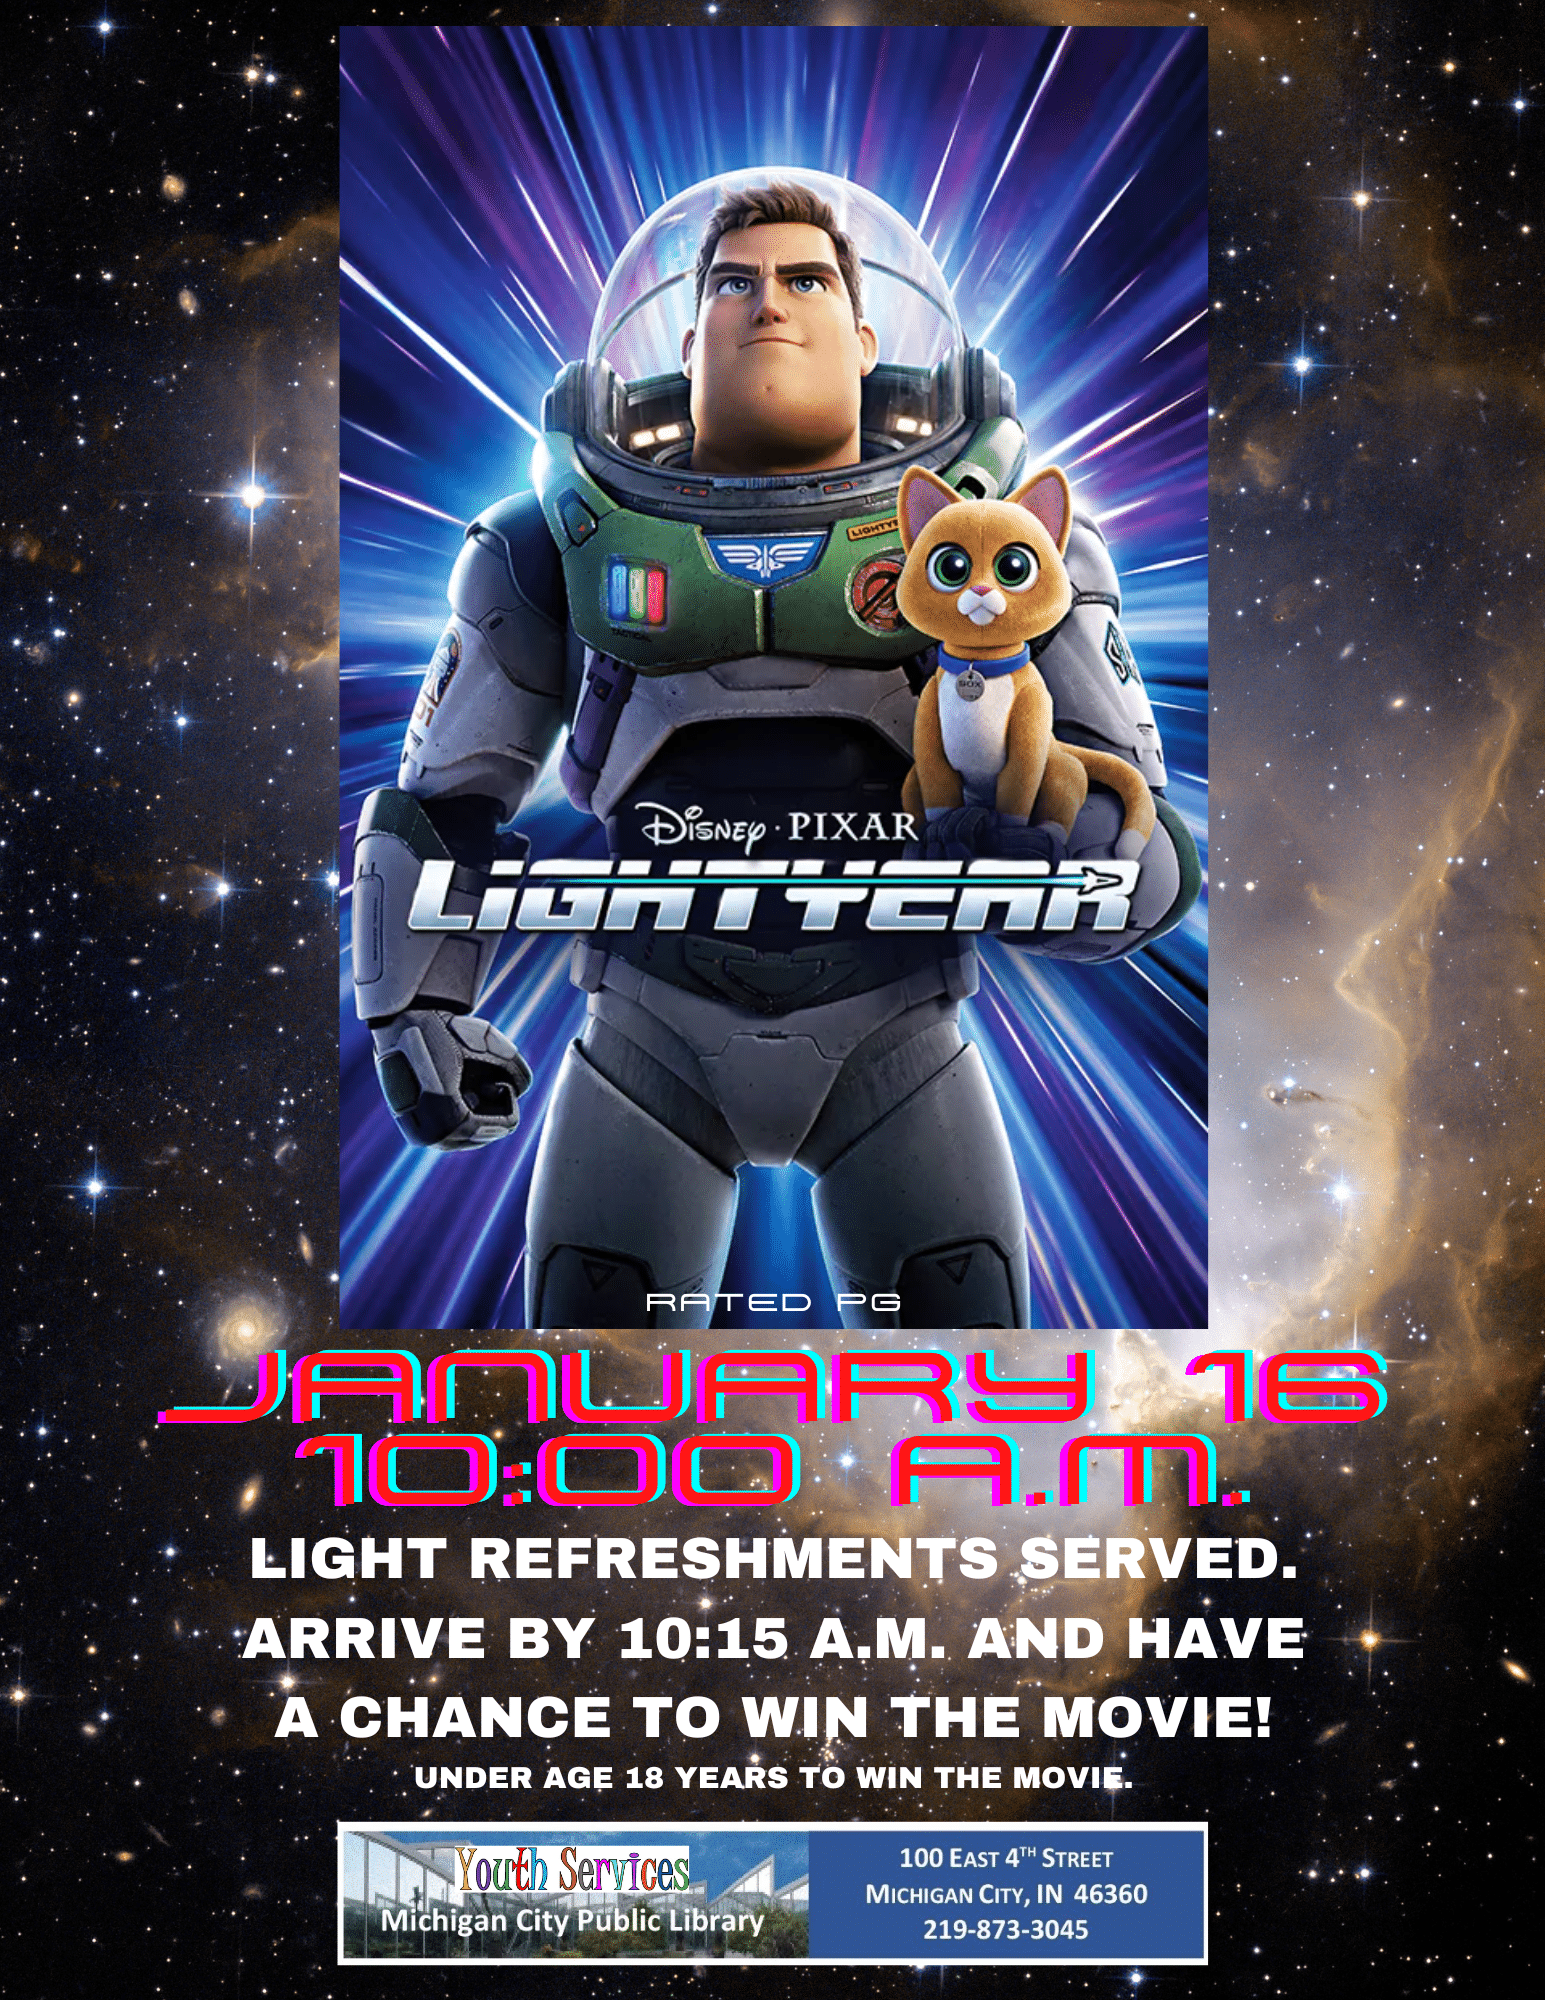 the movie poster for the film lightyear is shown with information about the event